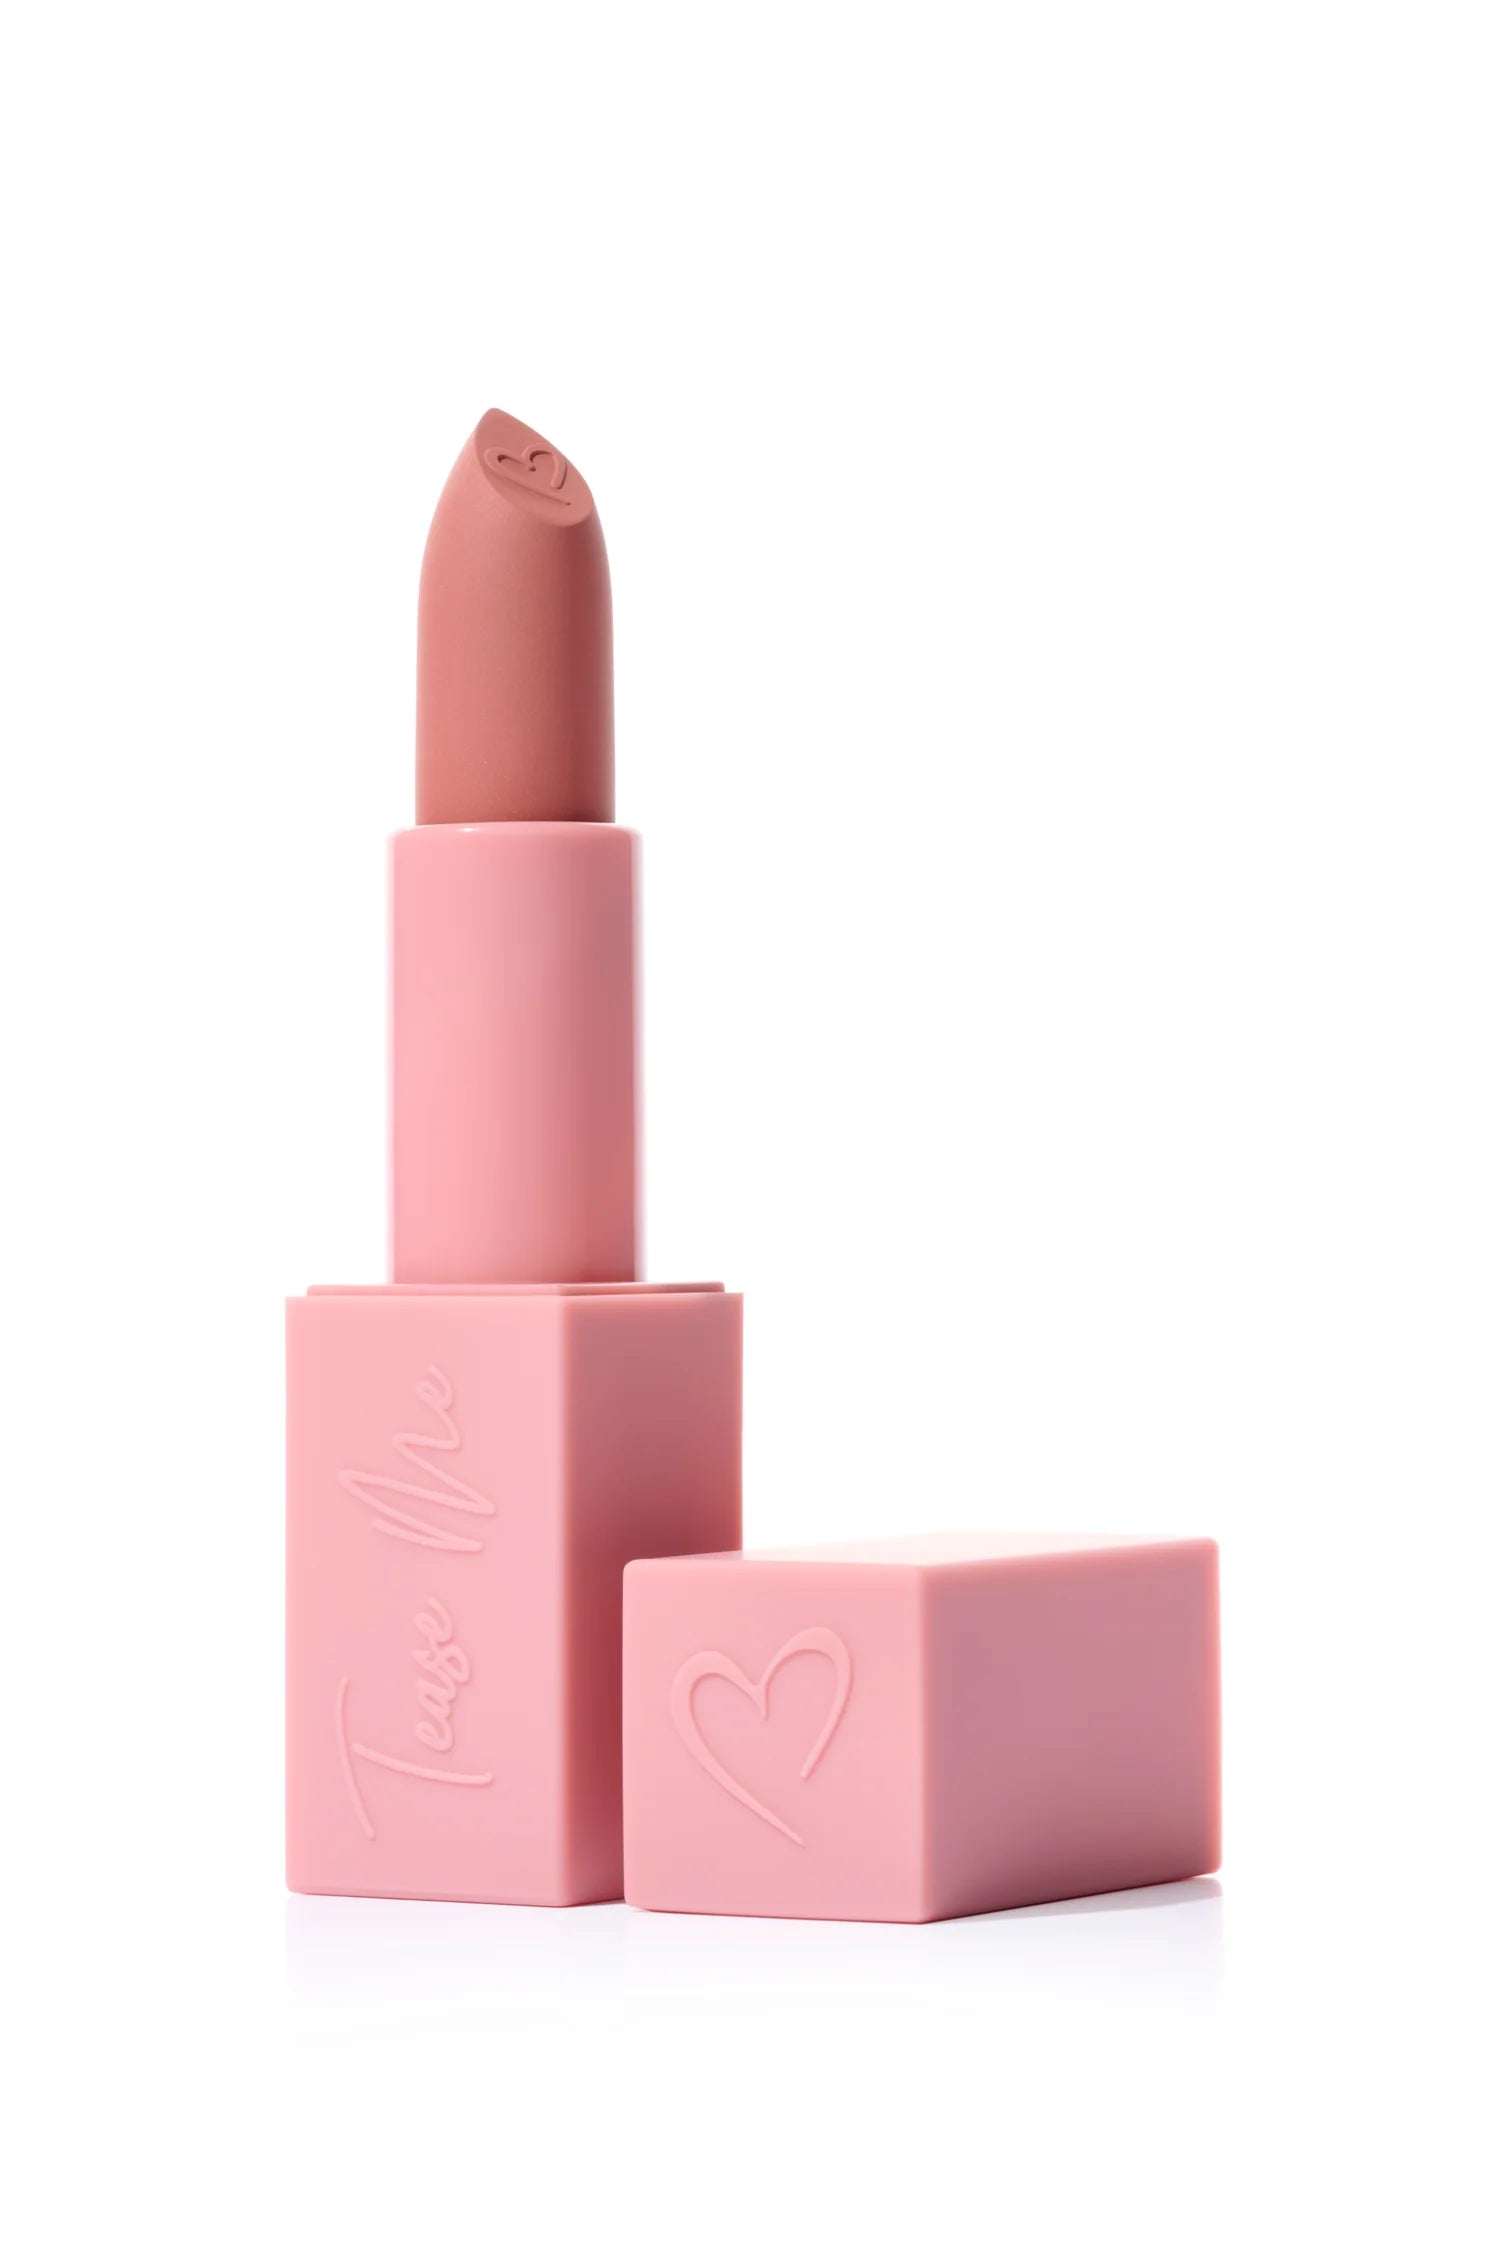 Beauty Creations - Tease Me Collection Lipstick - Hint Hint